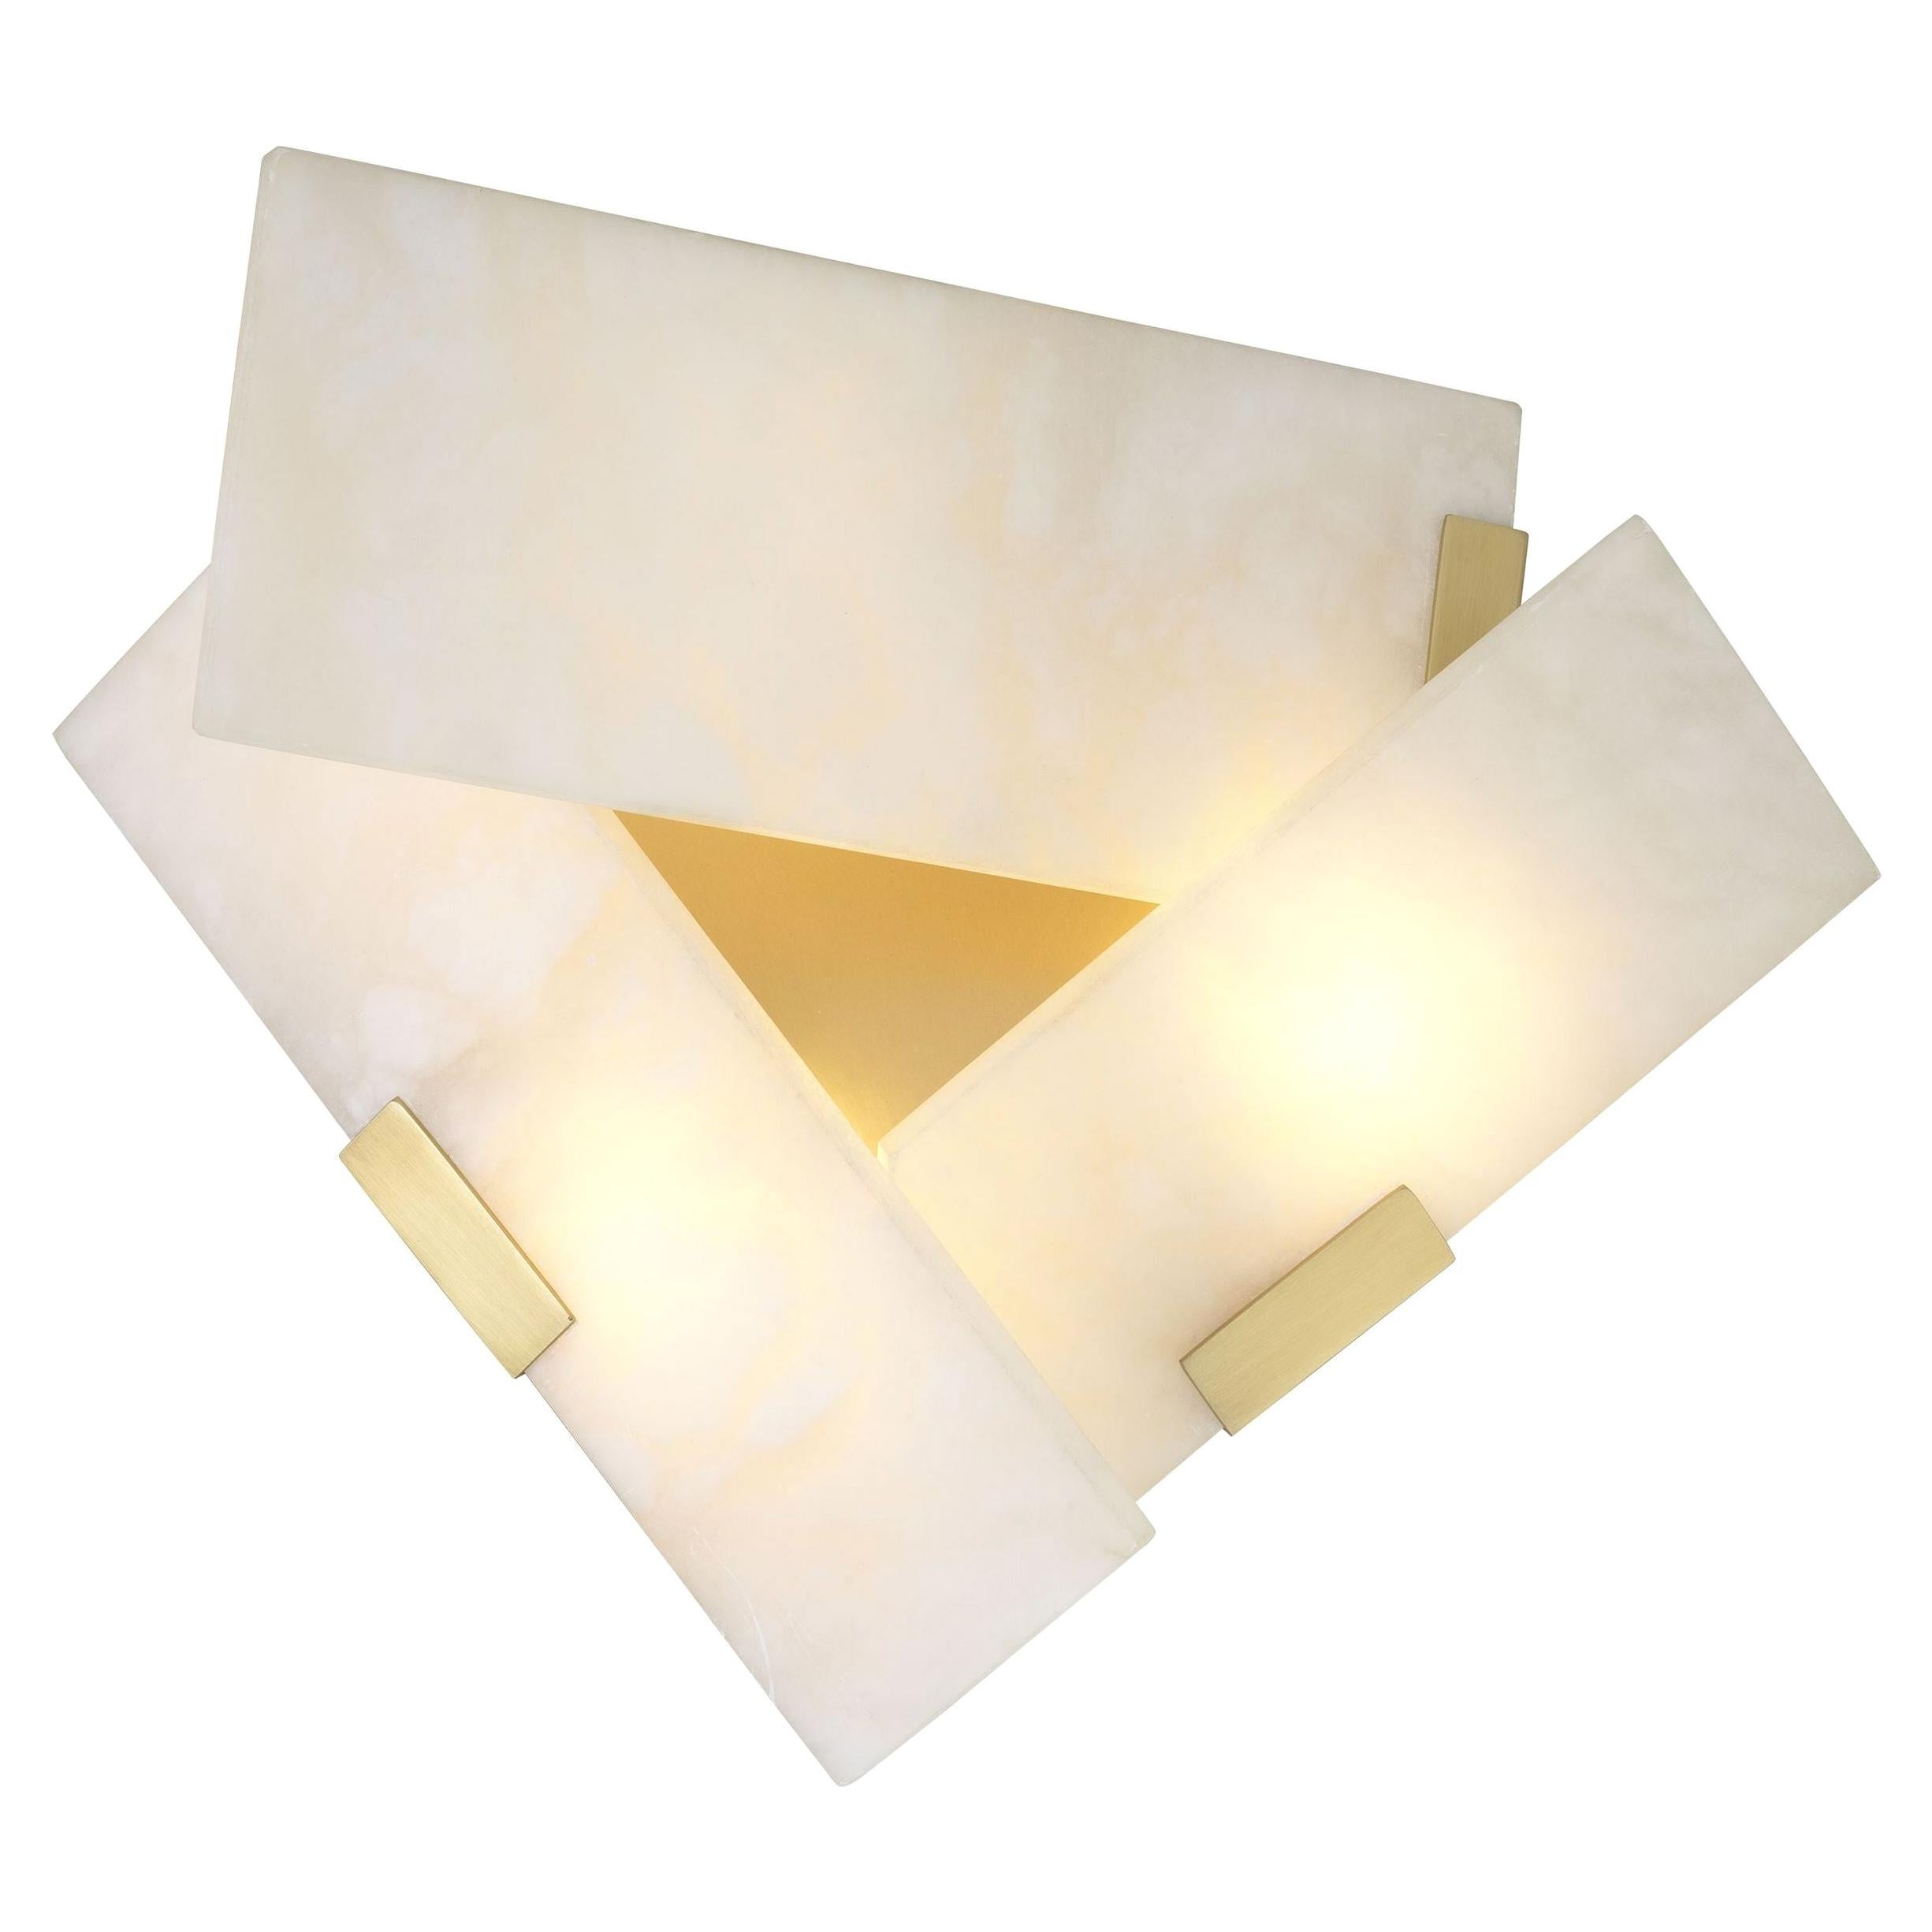 Art Deco Style Brass and White Alabaster Wall Light